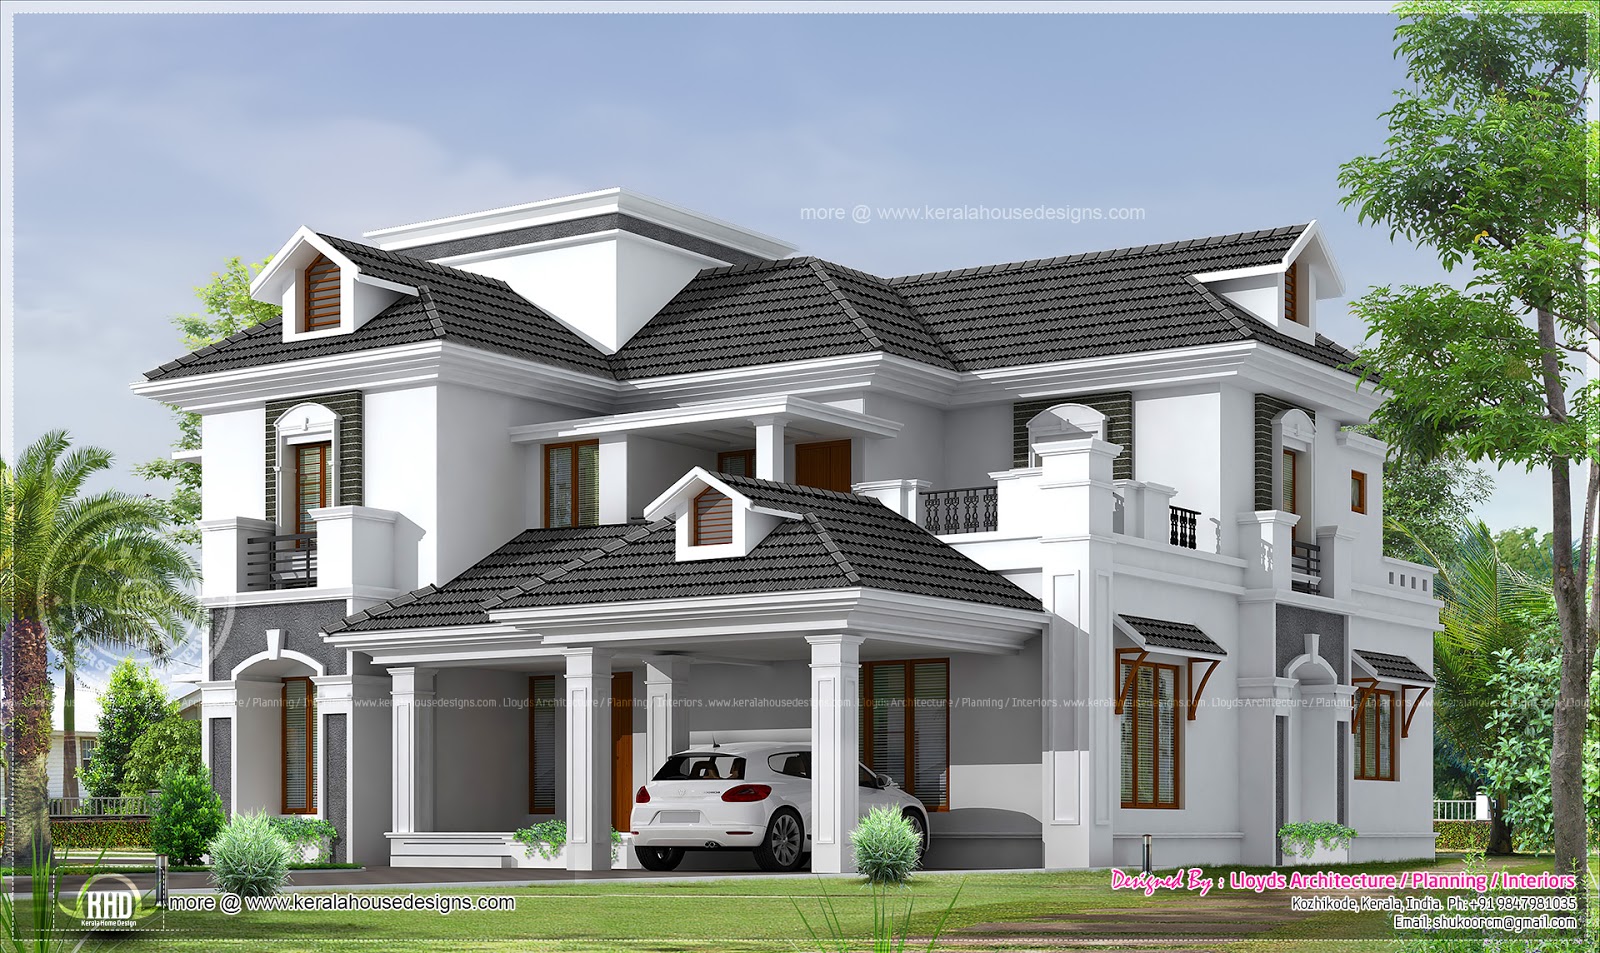 2951 sq.ft. 4 bedroom bungalow floor plan and 3D View ~ Indian House ...